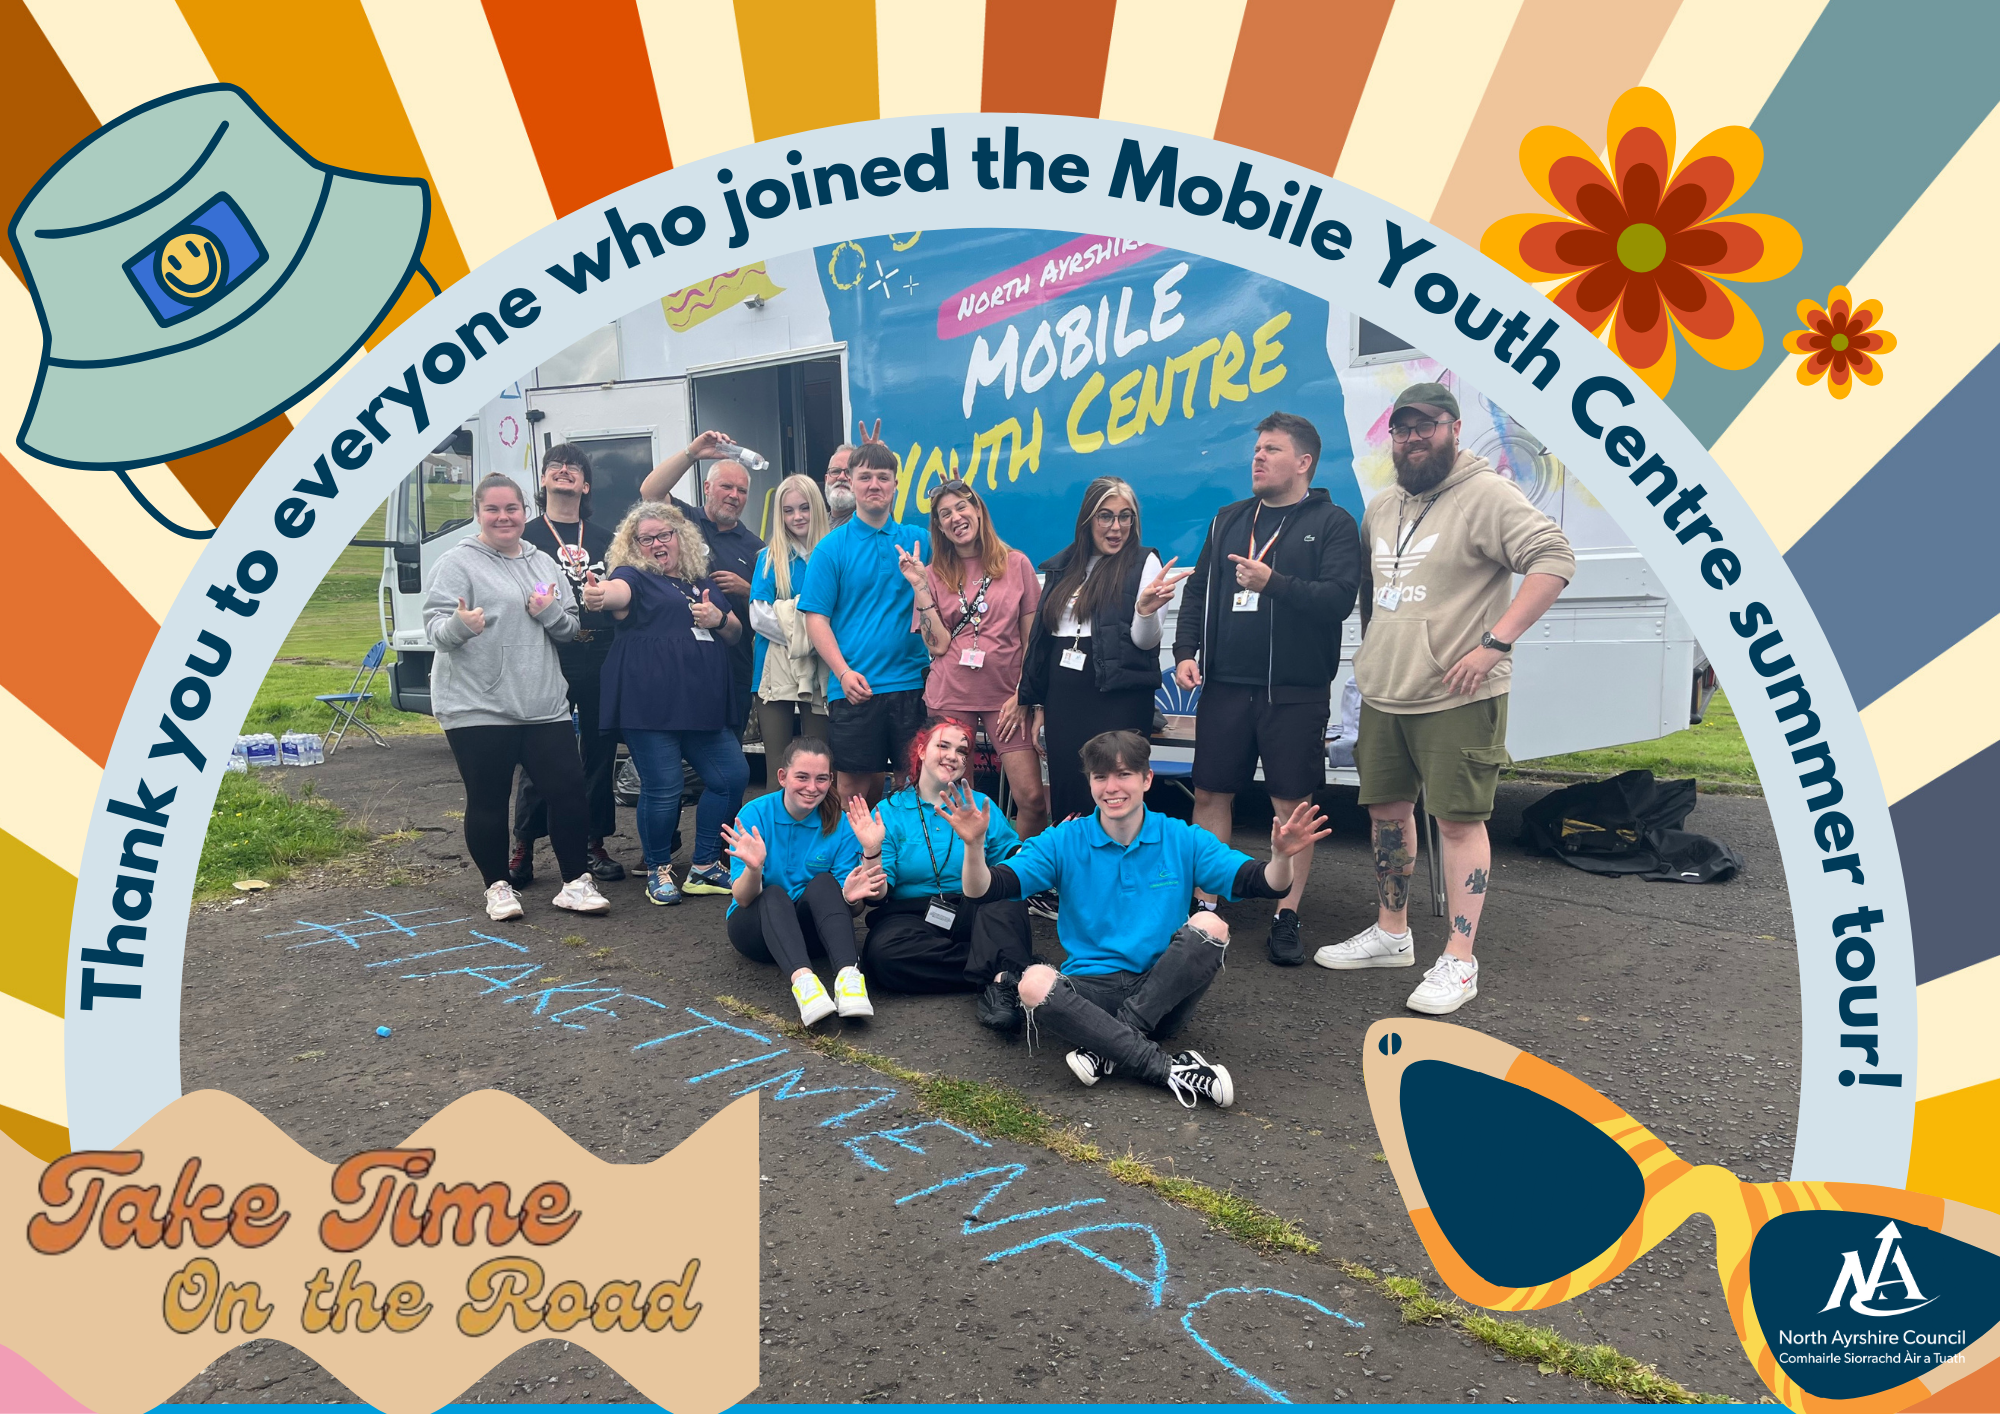 group of colleagues in front of a mobile youth centre bus with banner reading 'thank you to everyone who came to the Mobile Youth Centre Summer Tour' and a sunshine with rays graphic